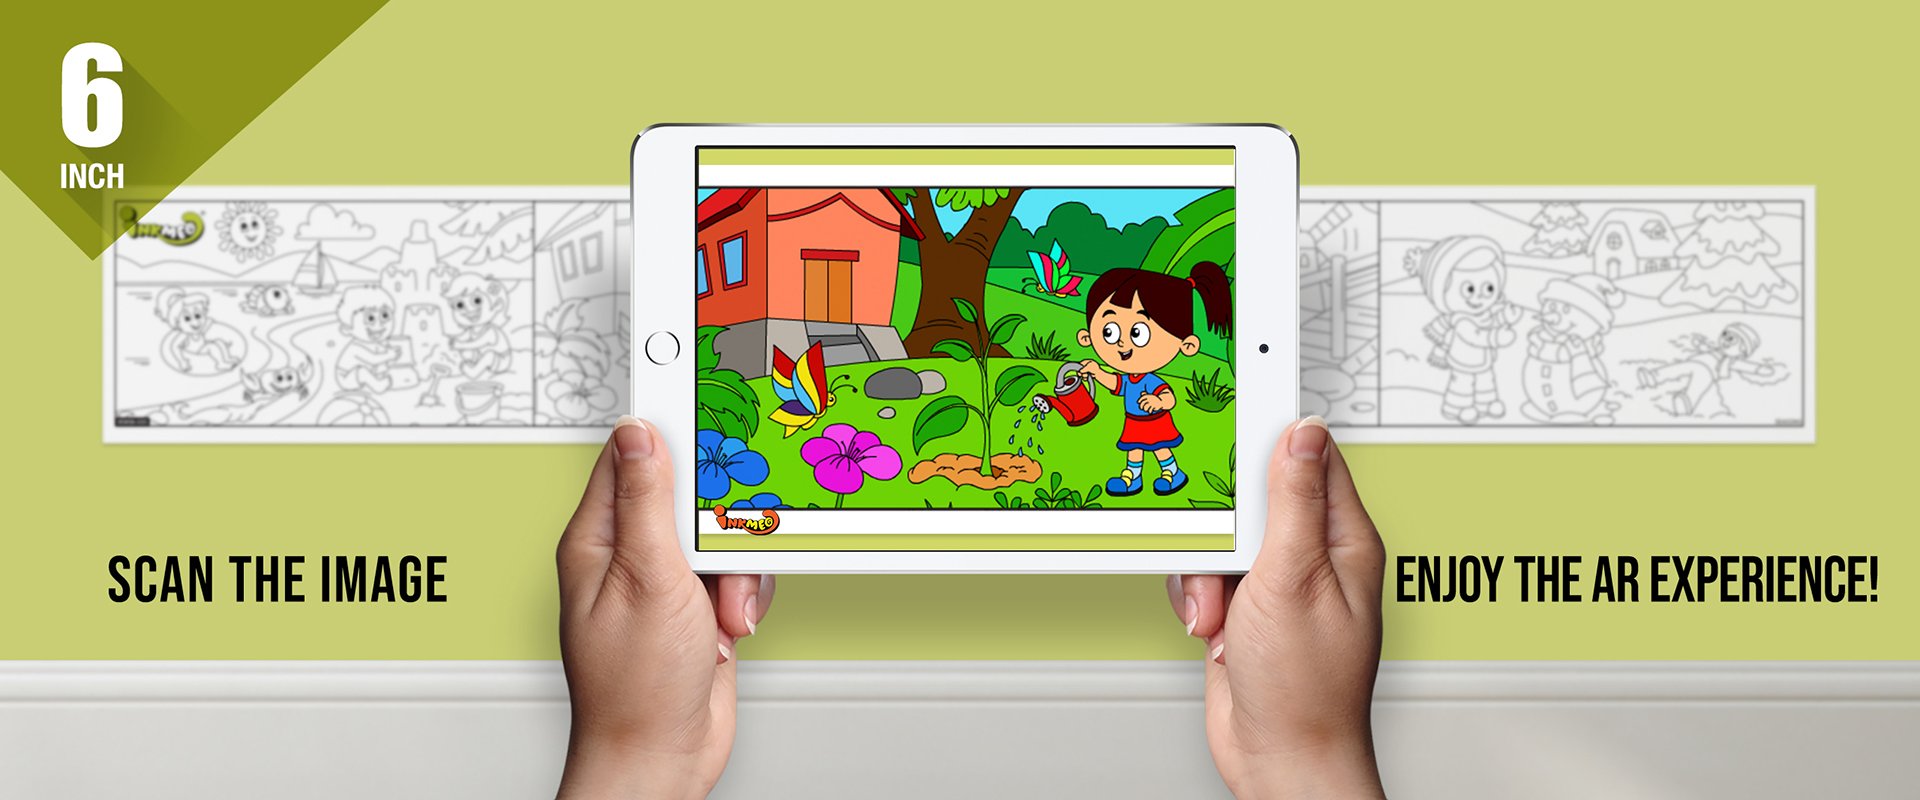 The image depicts two hands holding a tablet displaying a picture from a sheet attached to the wall. The description encourages scanning the image to enjoy the AR experience.